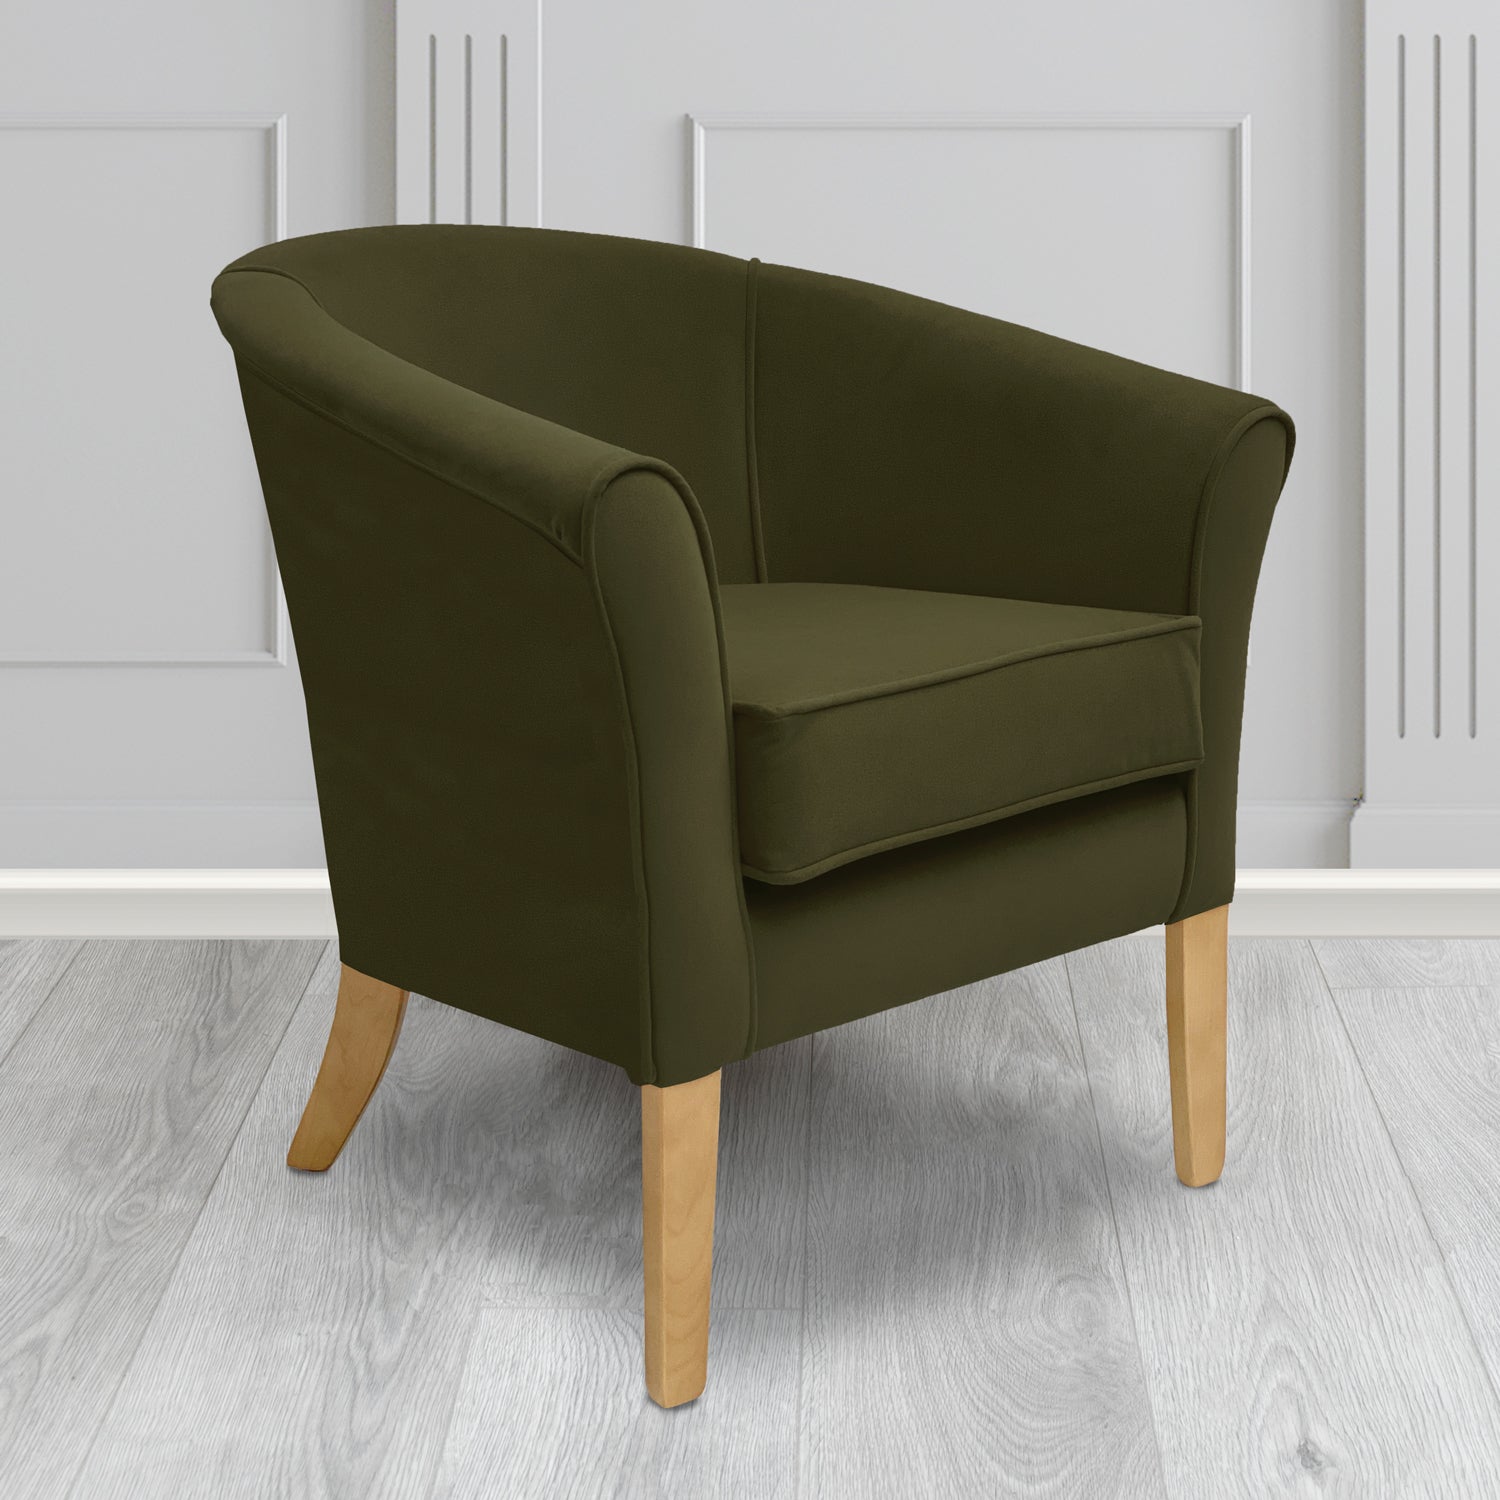 Aspen Tub Chair in Noble 204 Moss Crib 5 Velvet Fabric - Water Resistant - The Tub Chair Shop